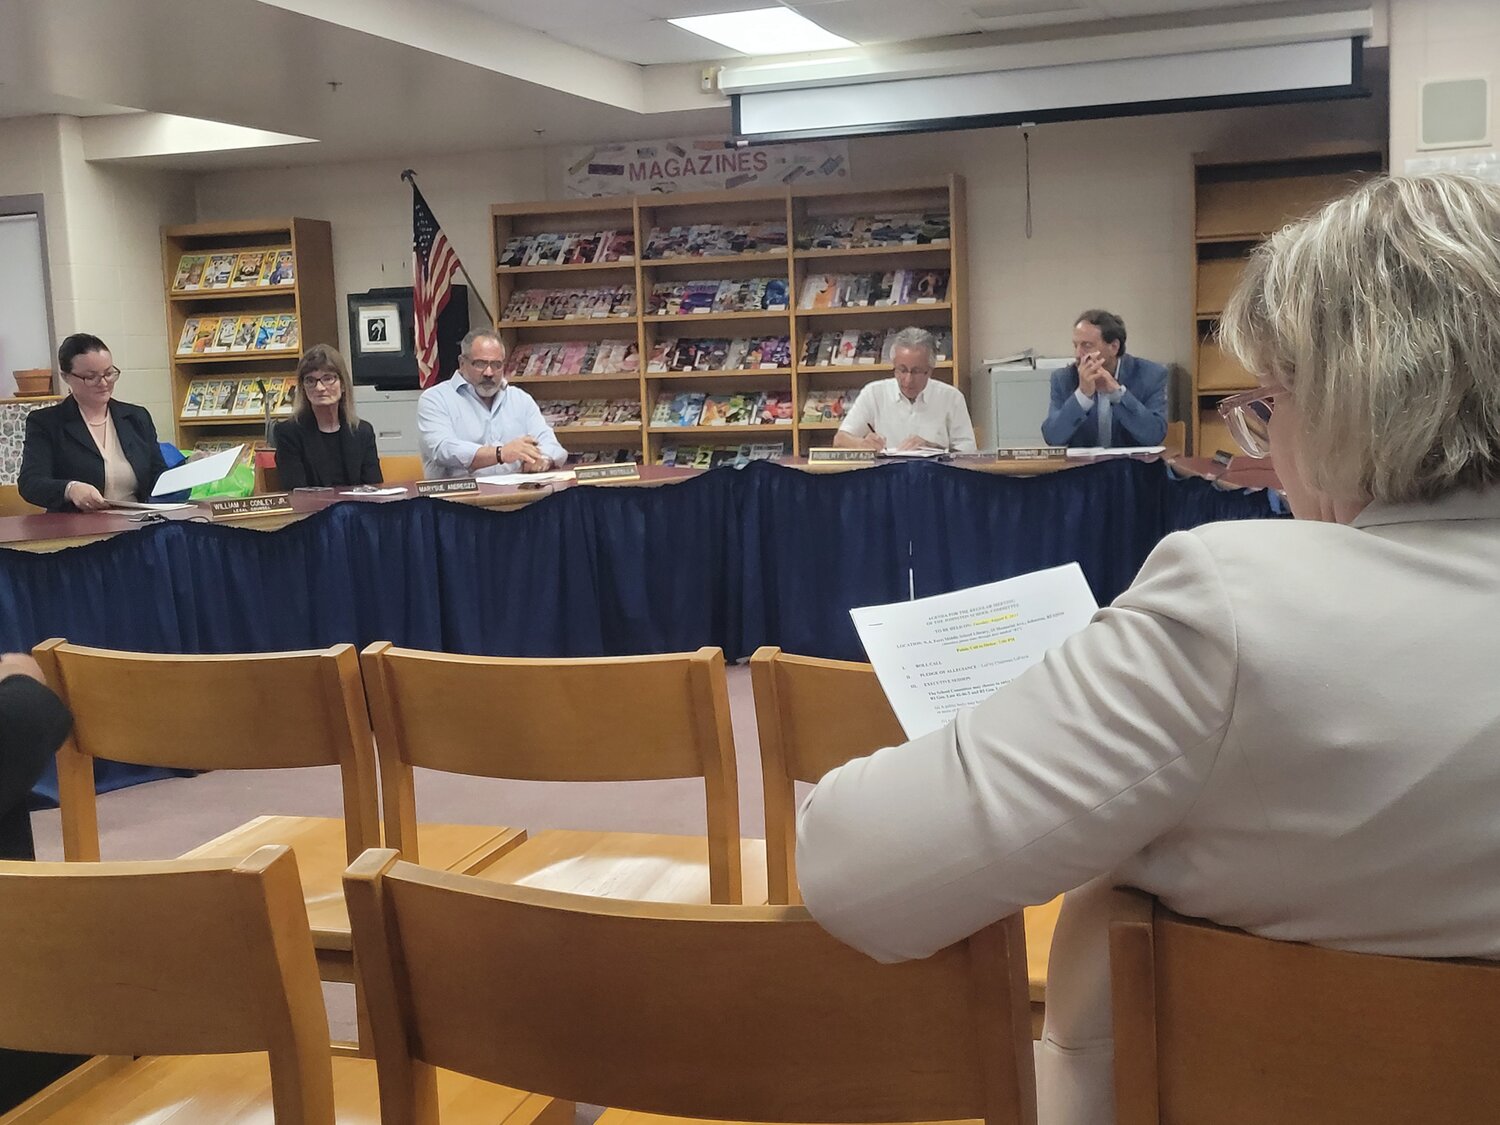 APPOINT OR ELECT? The Johnston School Committee met Tuesday night, the same night Johnston Mayor Joseph M. Polisena Jr. broached the question whether to elect or appoint its members.